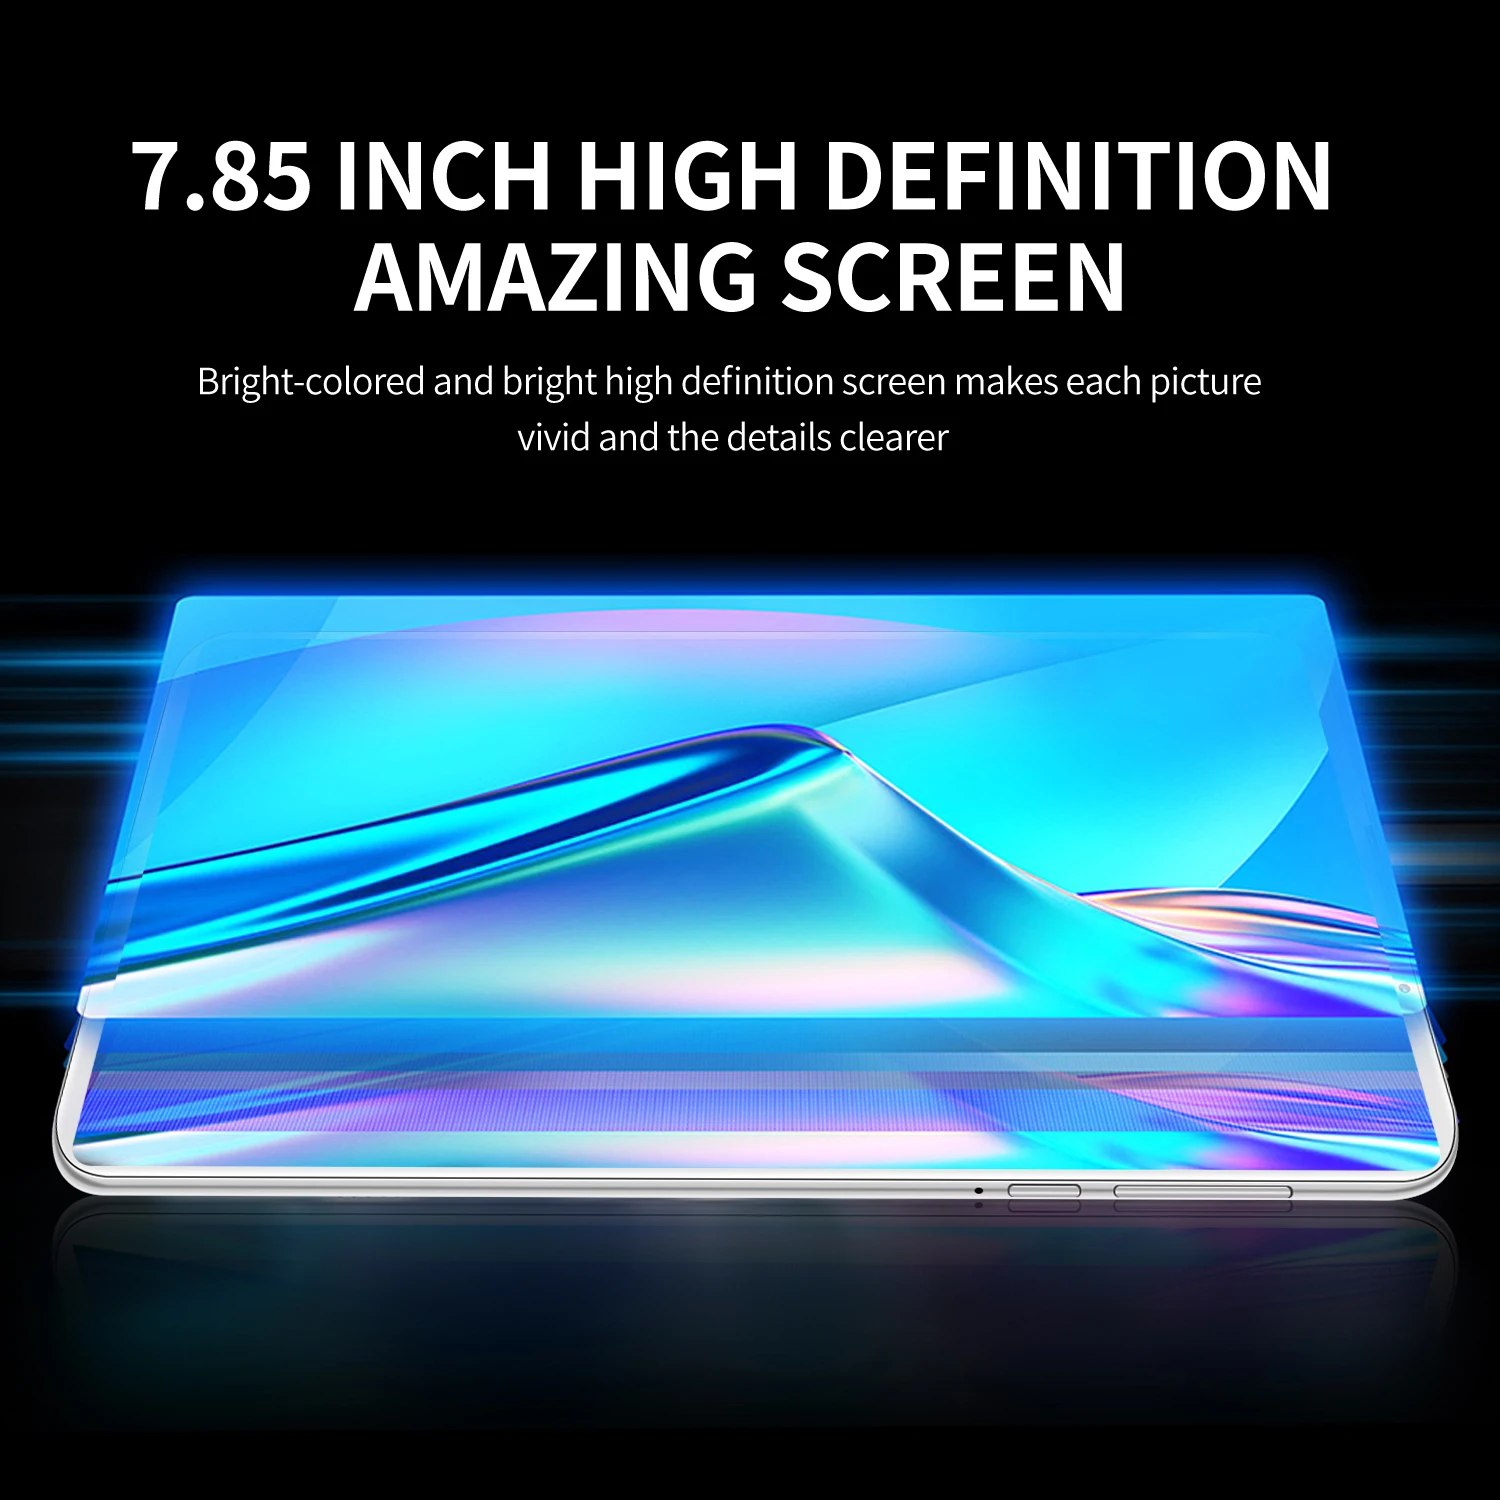 ноутбук P50 Global Version Tablet PC 8800mAh 8 Inch Android 11 GPS 12GB 512GB Google Play Type-C Dual SIM Send Keyboard Tablette best gaming tablet